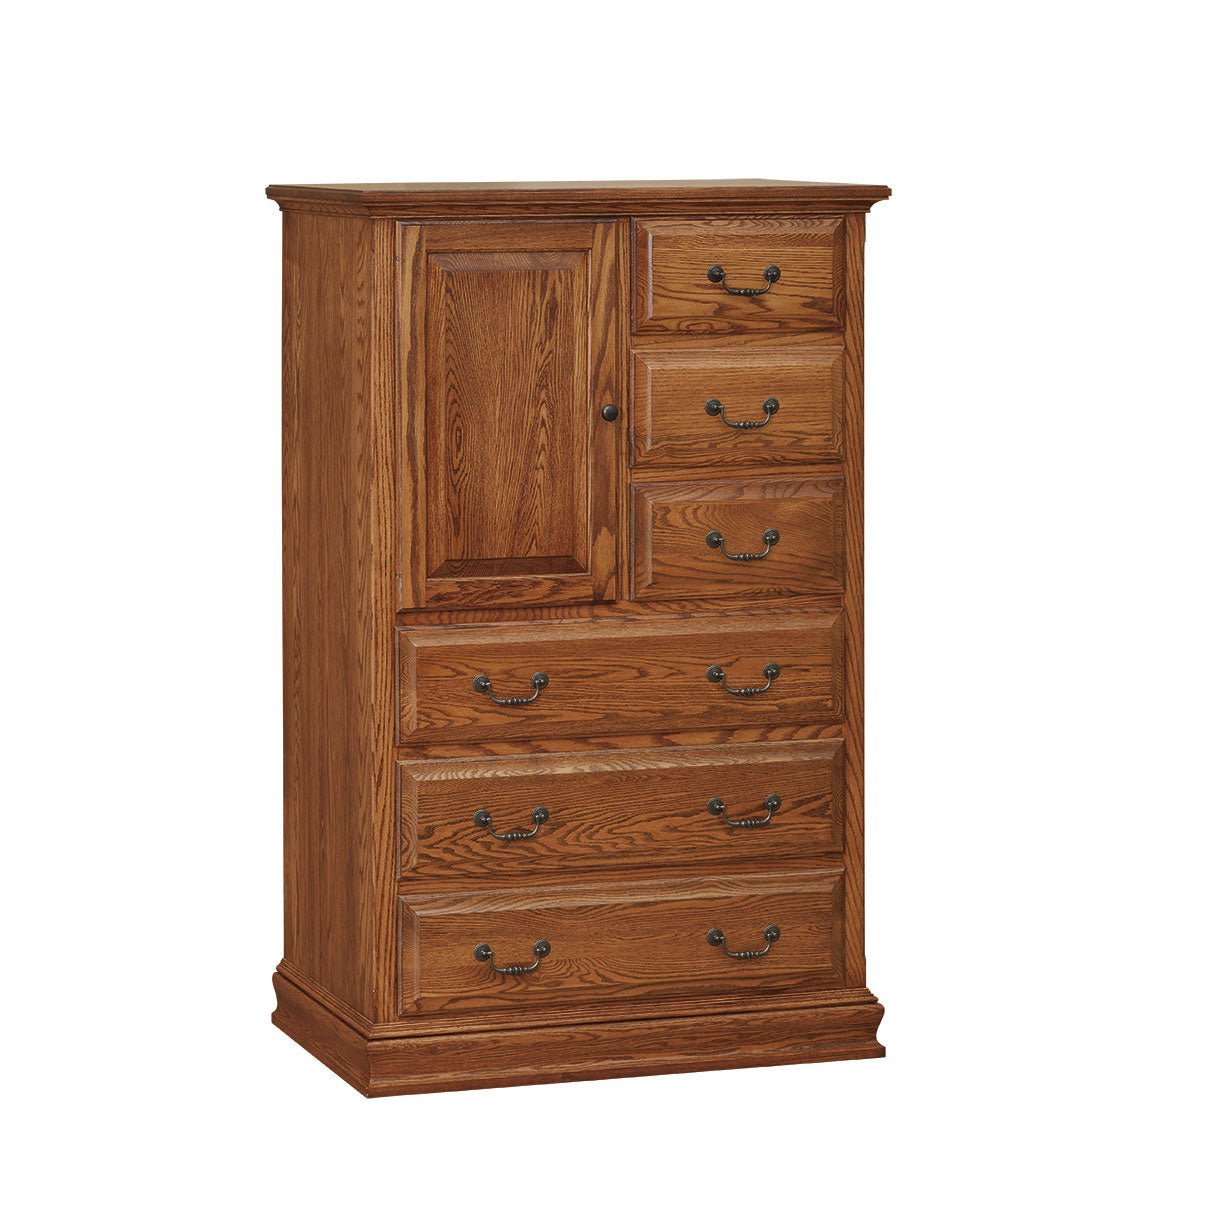 Eden Amish Solid Wood Royal Gentleman's Chest - snyders.furniture